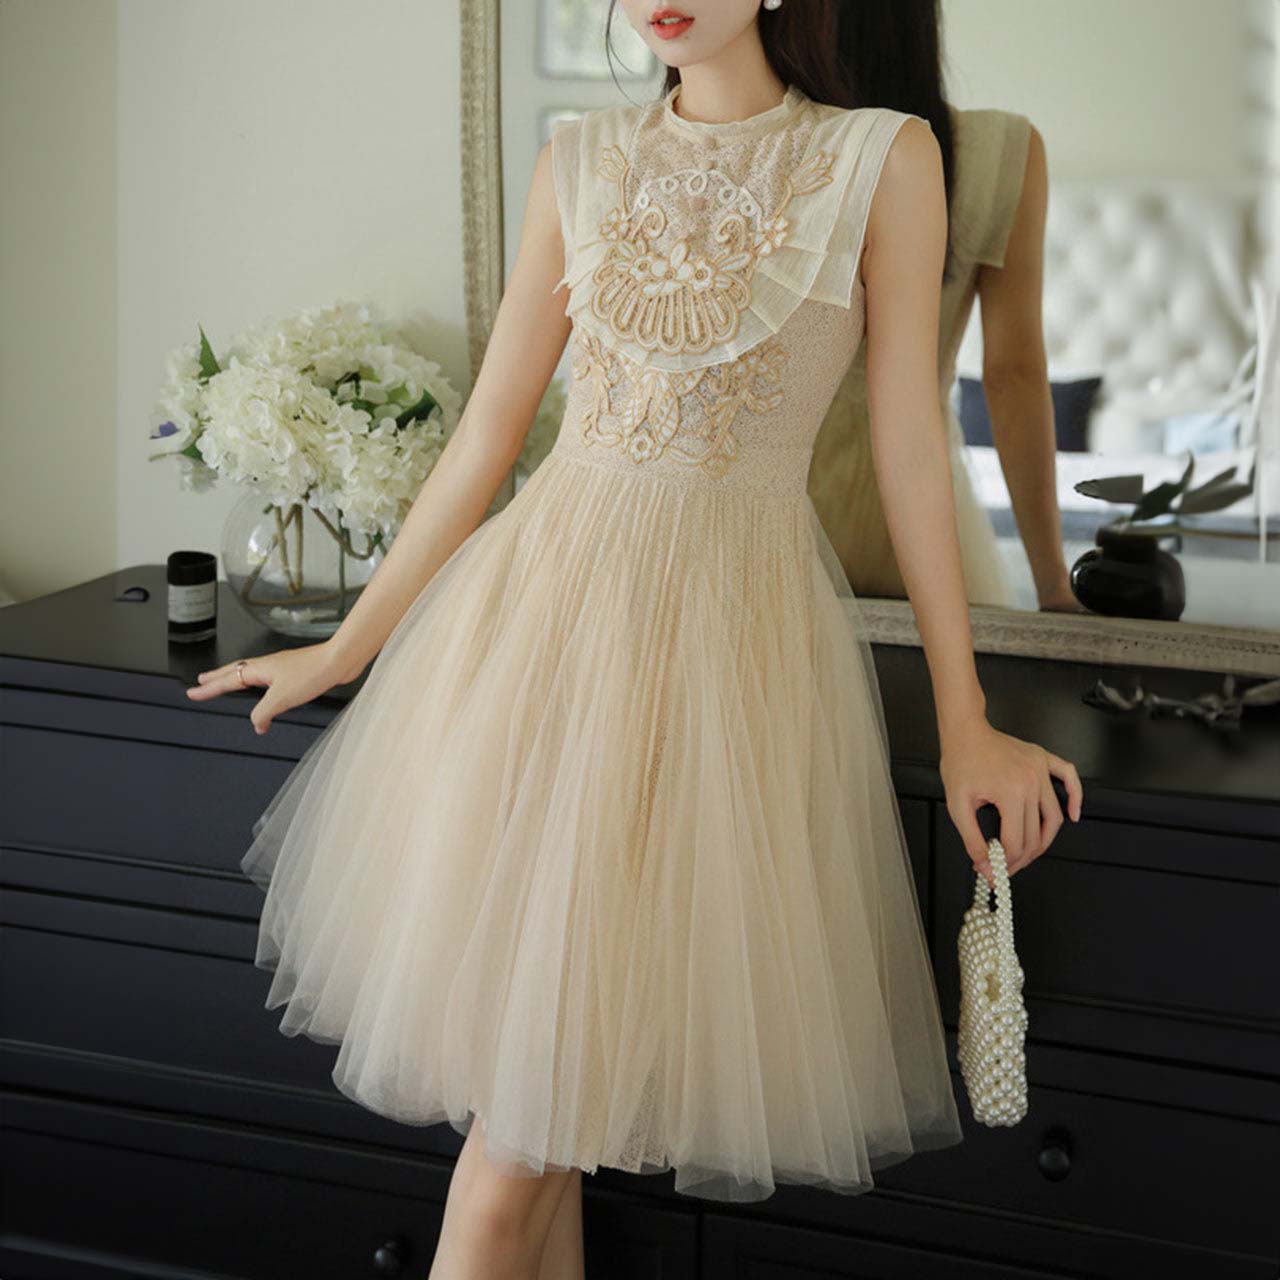 Enchanted Blush Tulle Dress with Golden Embroidery